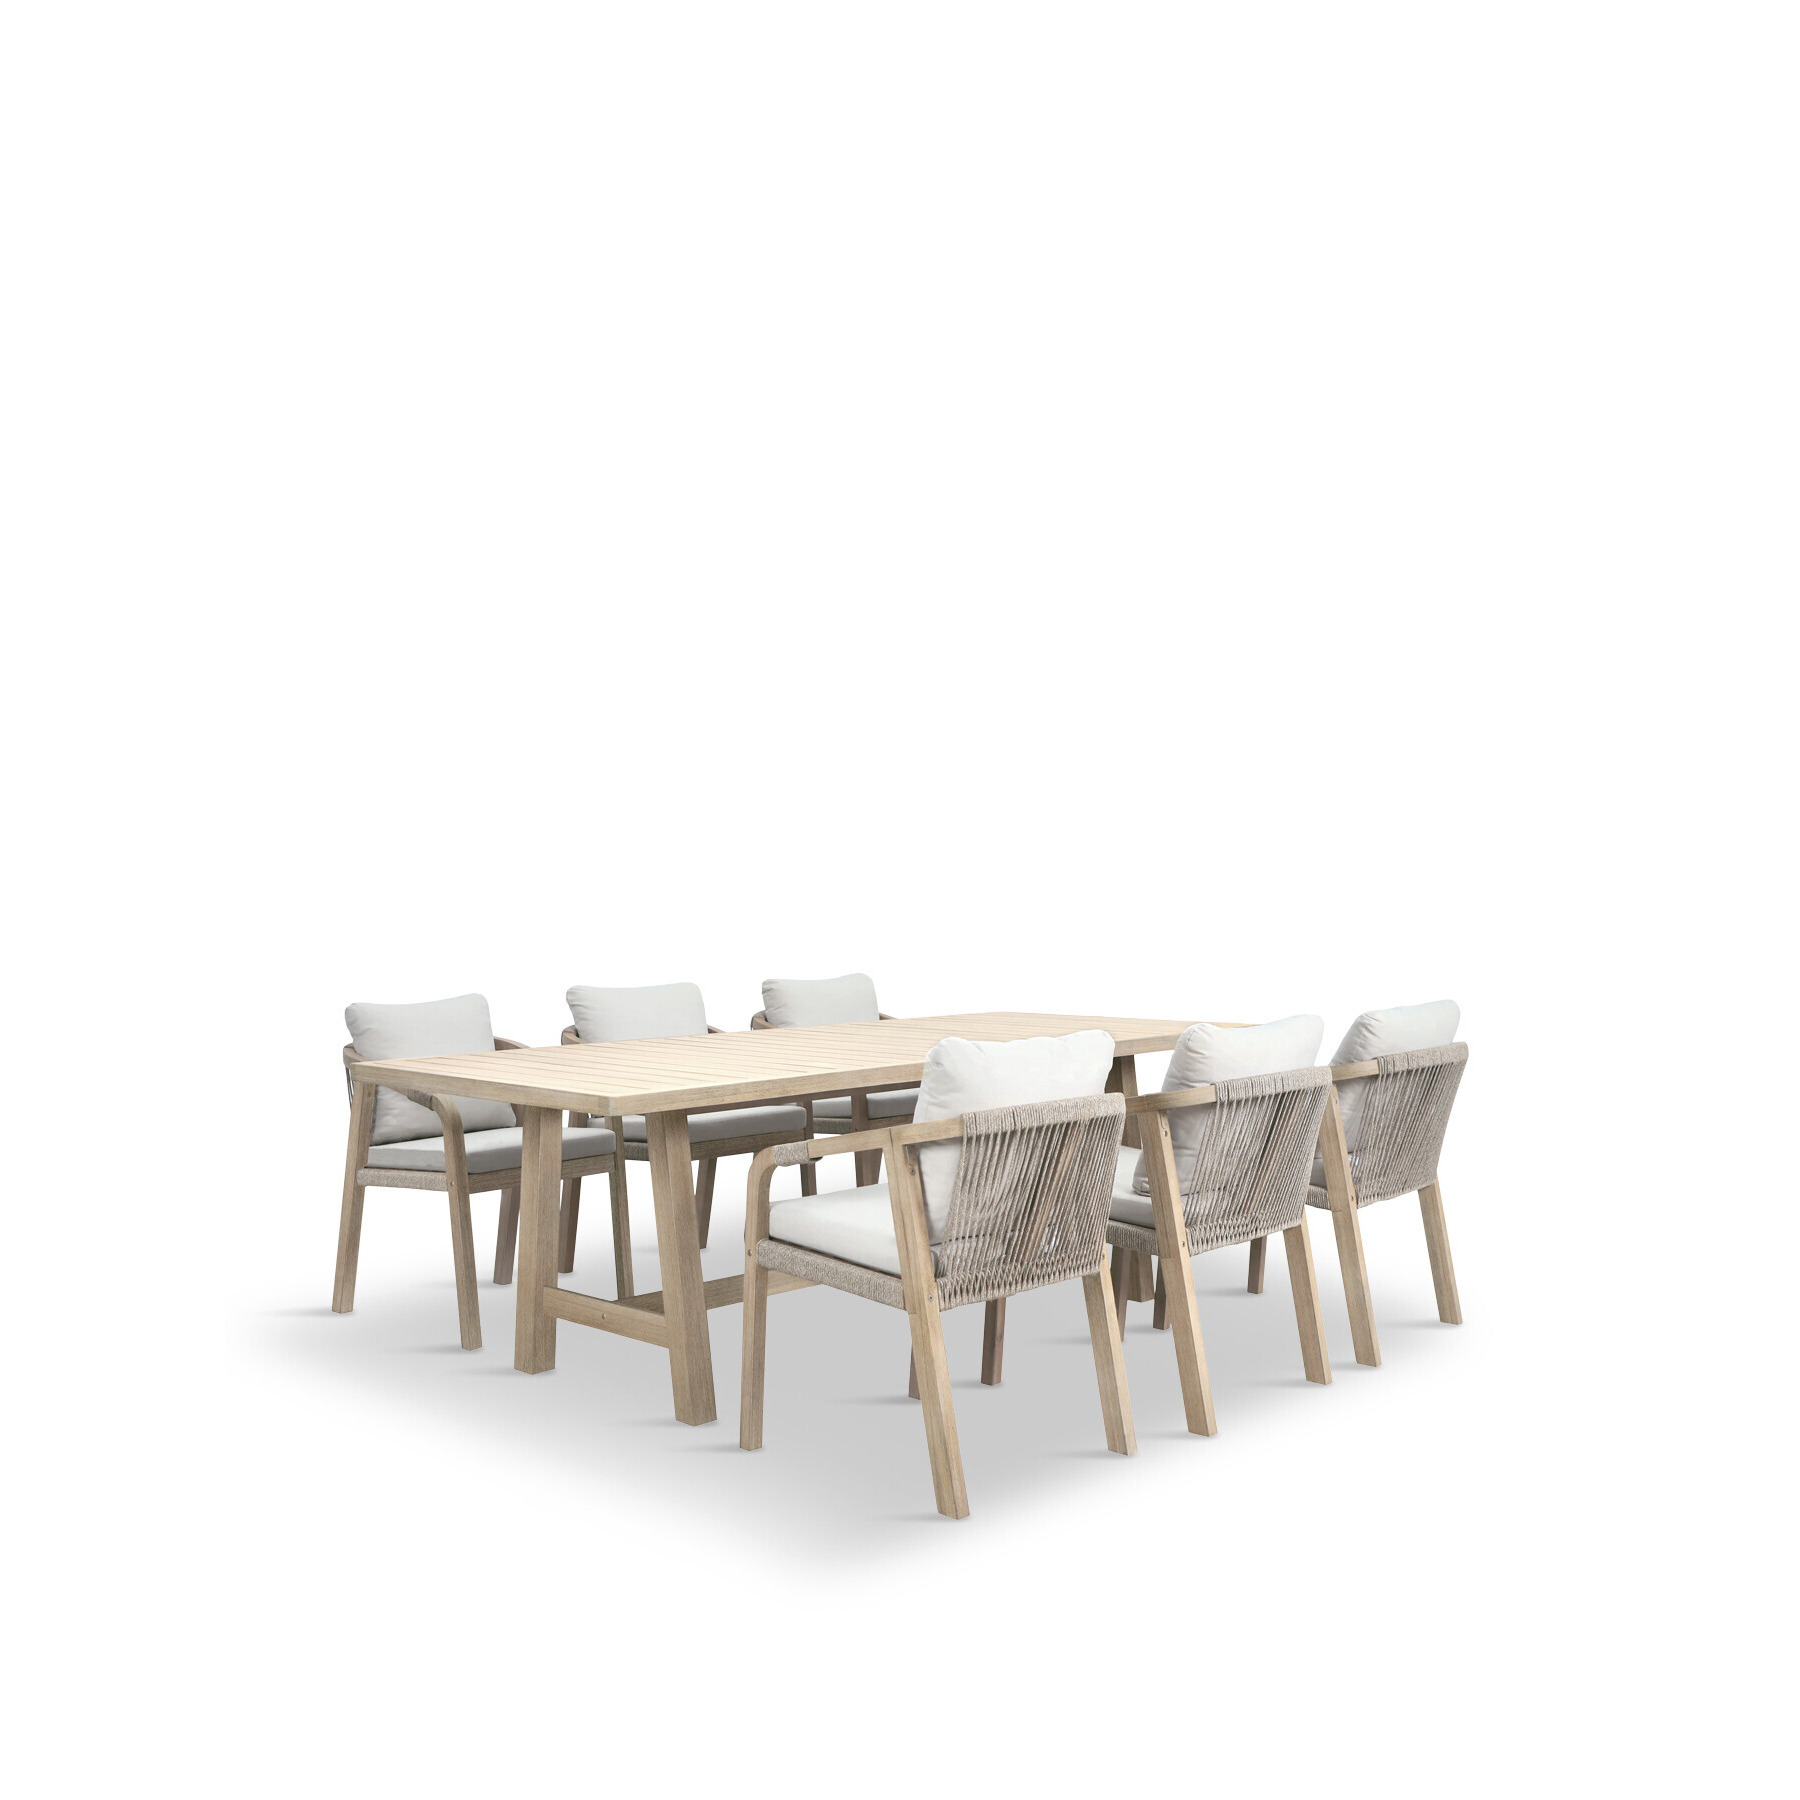 Kettler Cora 6 Seat Dining Set with Dining Table and 6 Chairs Natural - image 1